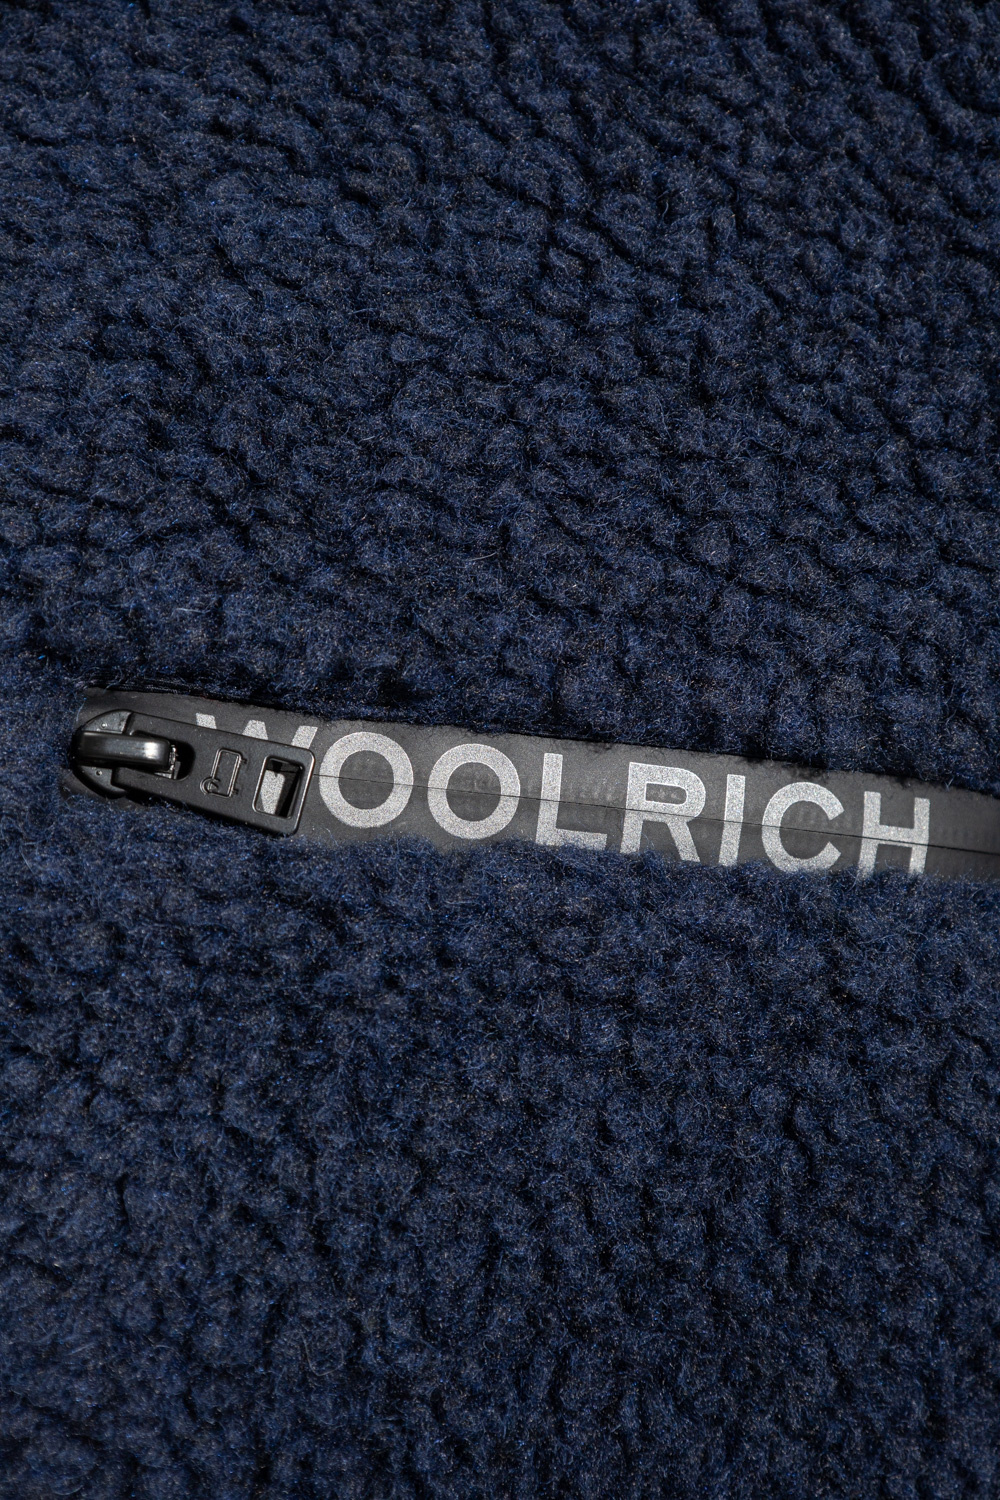 Woolrich Jacket with standing collar